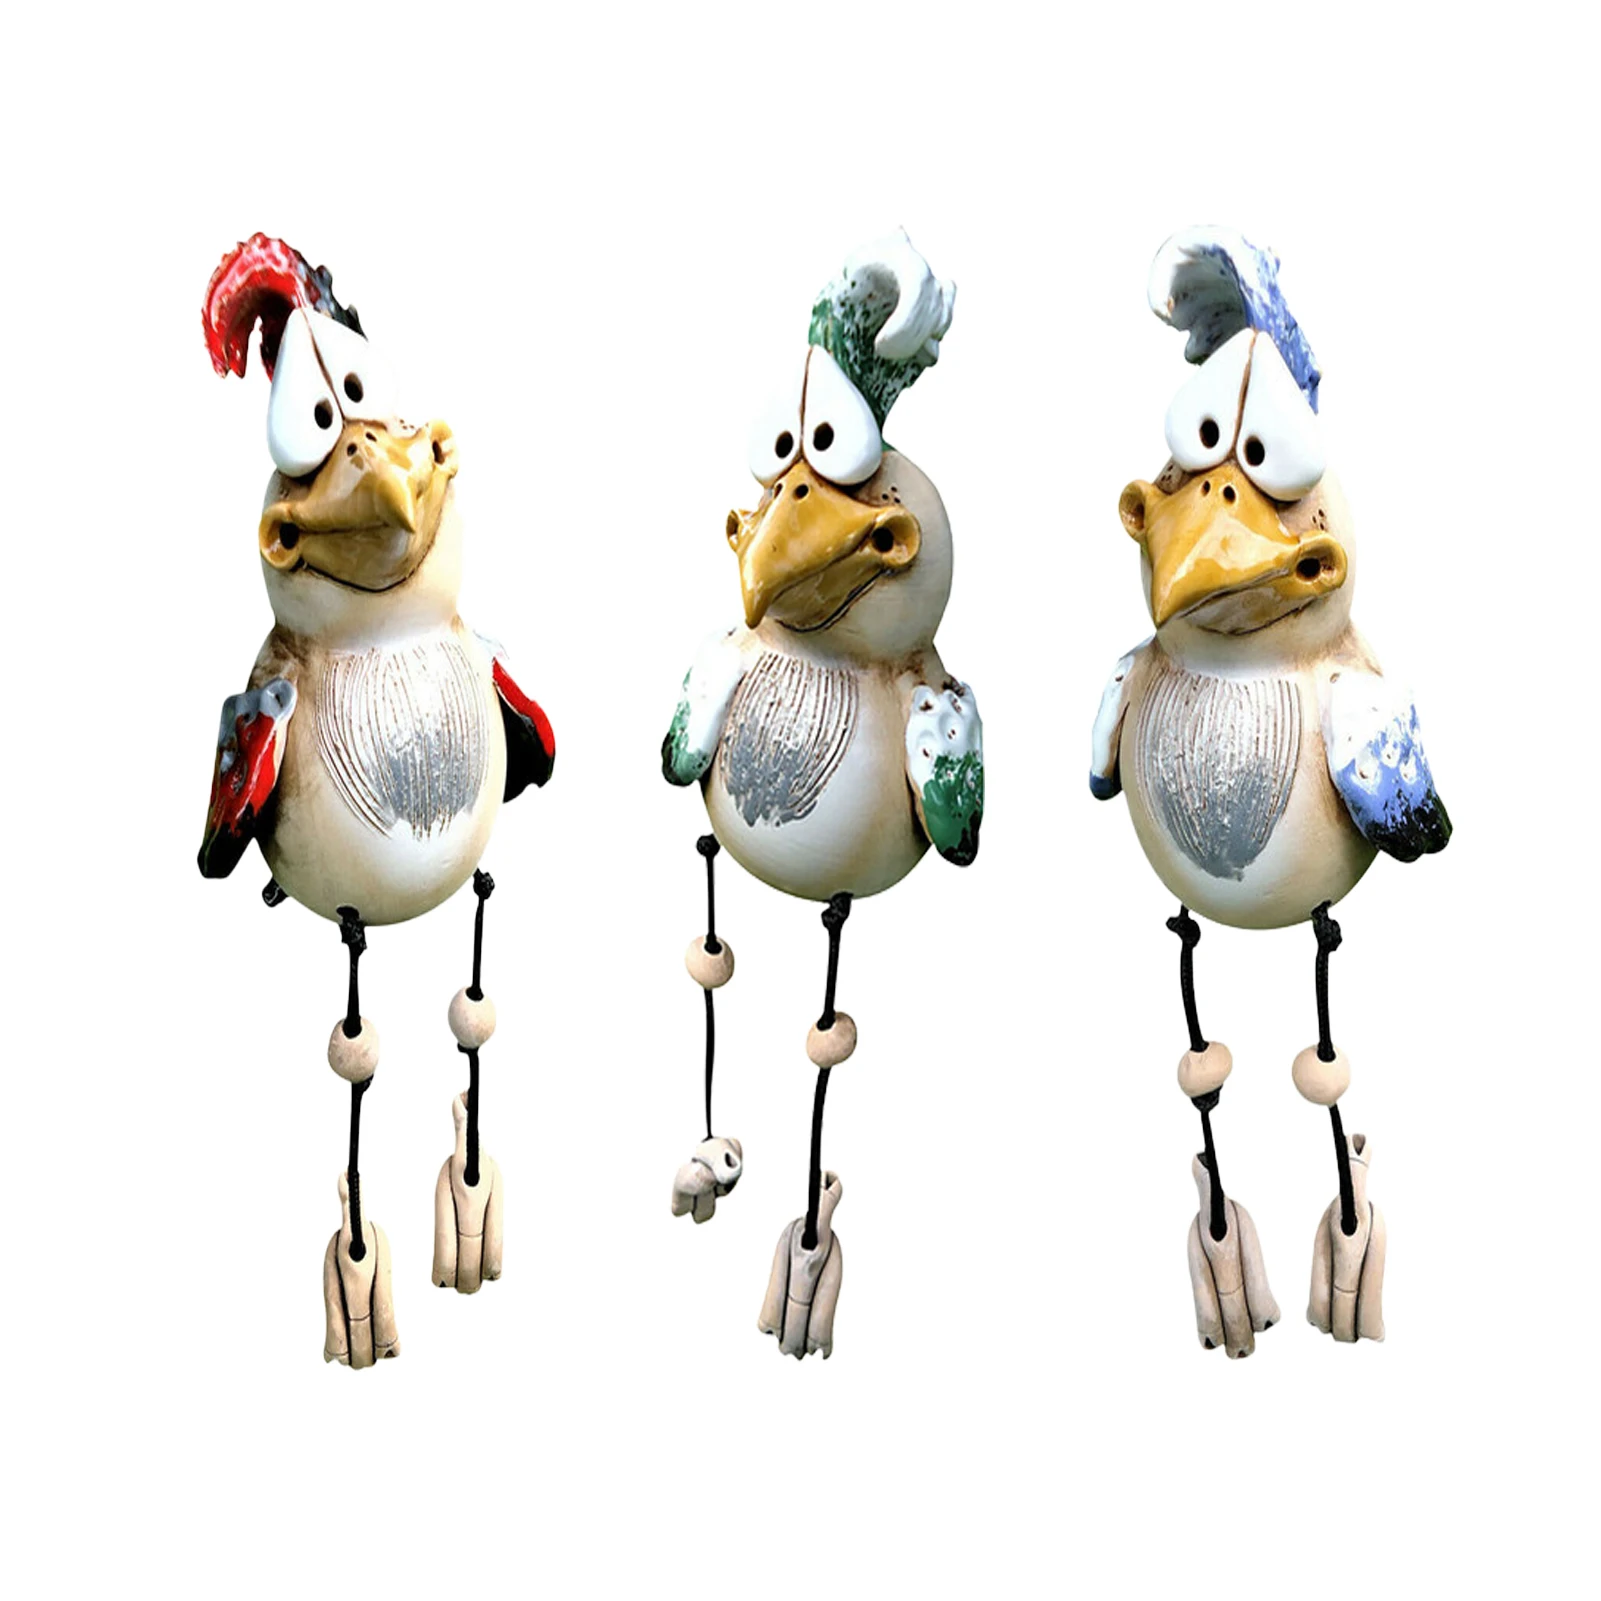 

Funny Chicken Garden Statues Farm Art-Backyard Decoration Ornament Chick Lawn Stakes Sculptures Courtyard Yard Home Decor